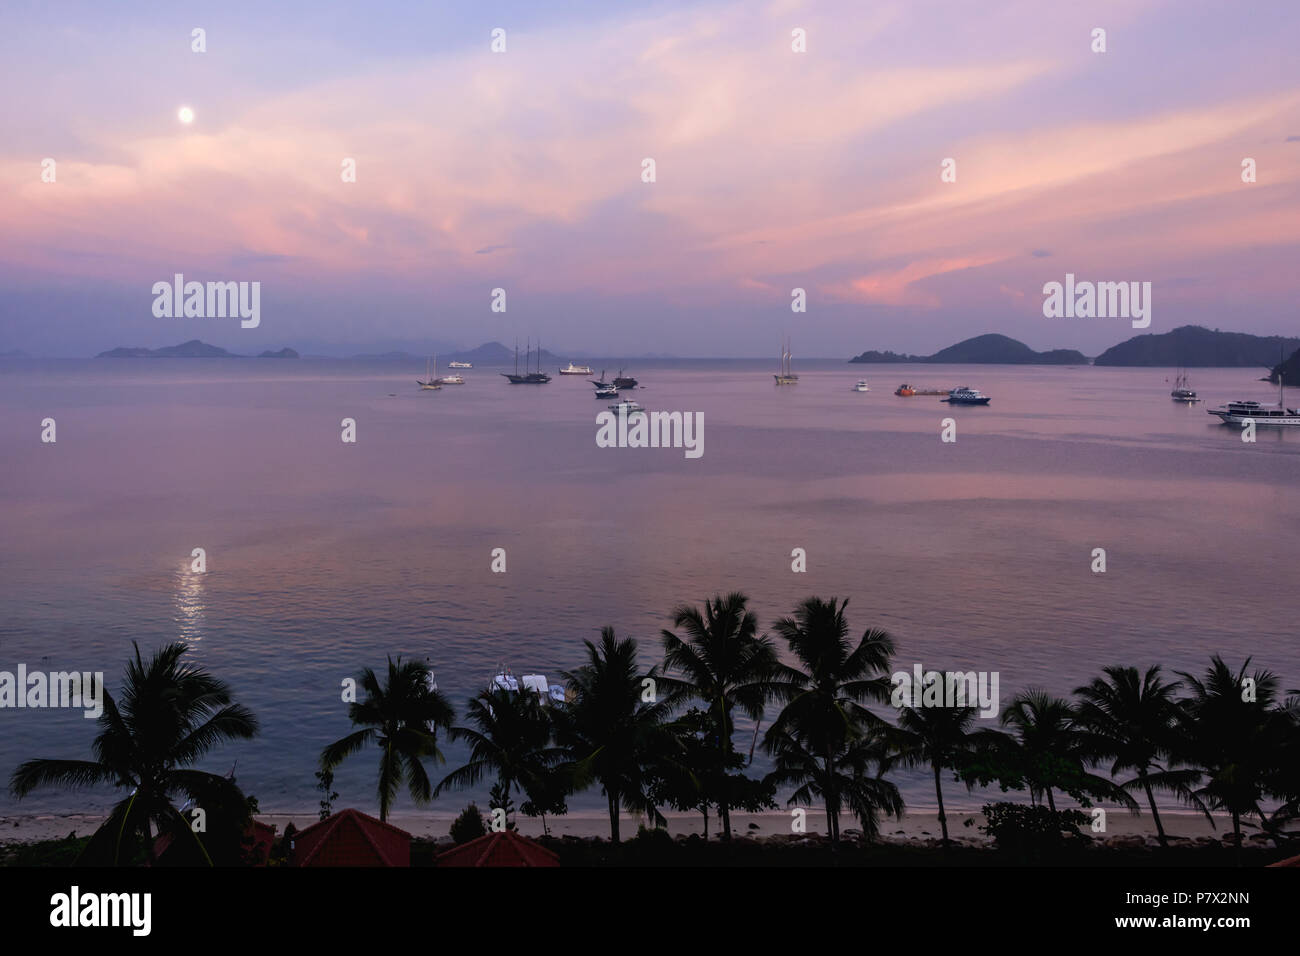 Sunrise with full moon and boats, Labuhan Bajo Harbour, East Nusa Tenggara, Indonesia Stock Photo